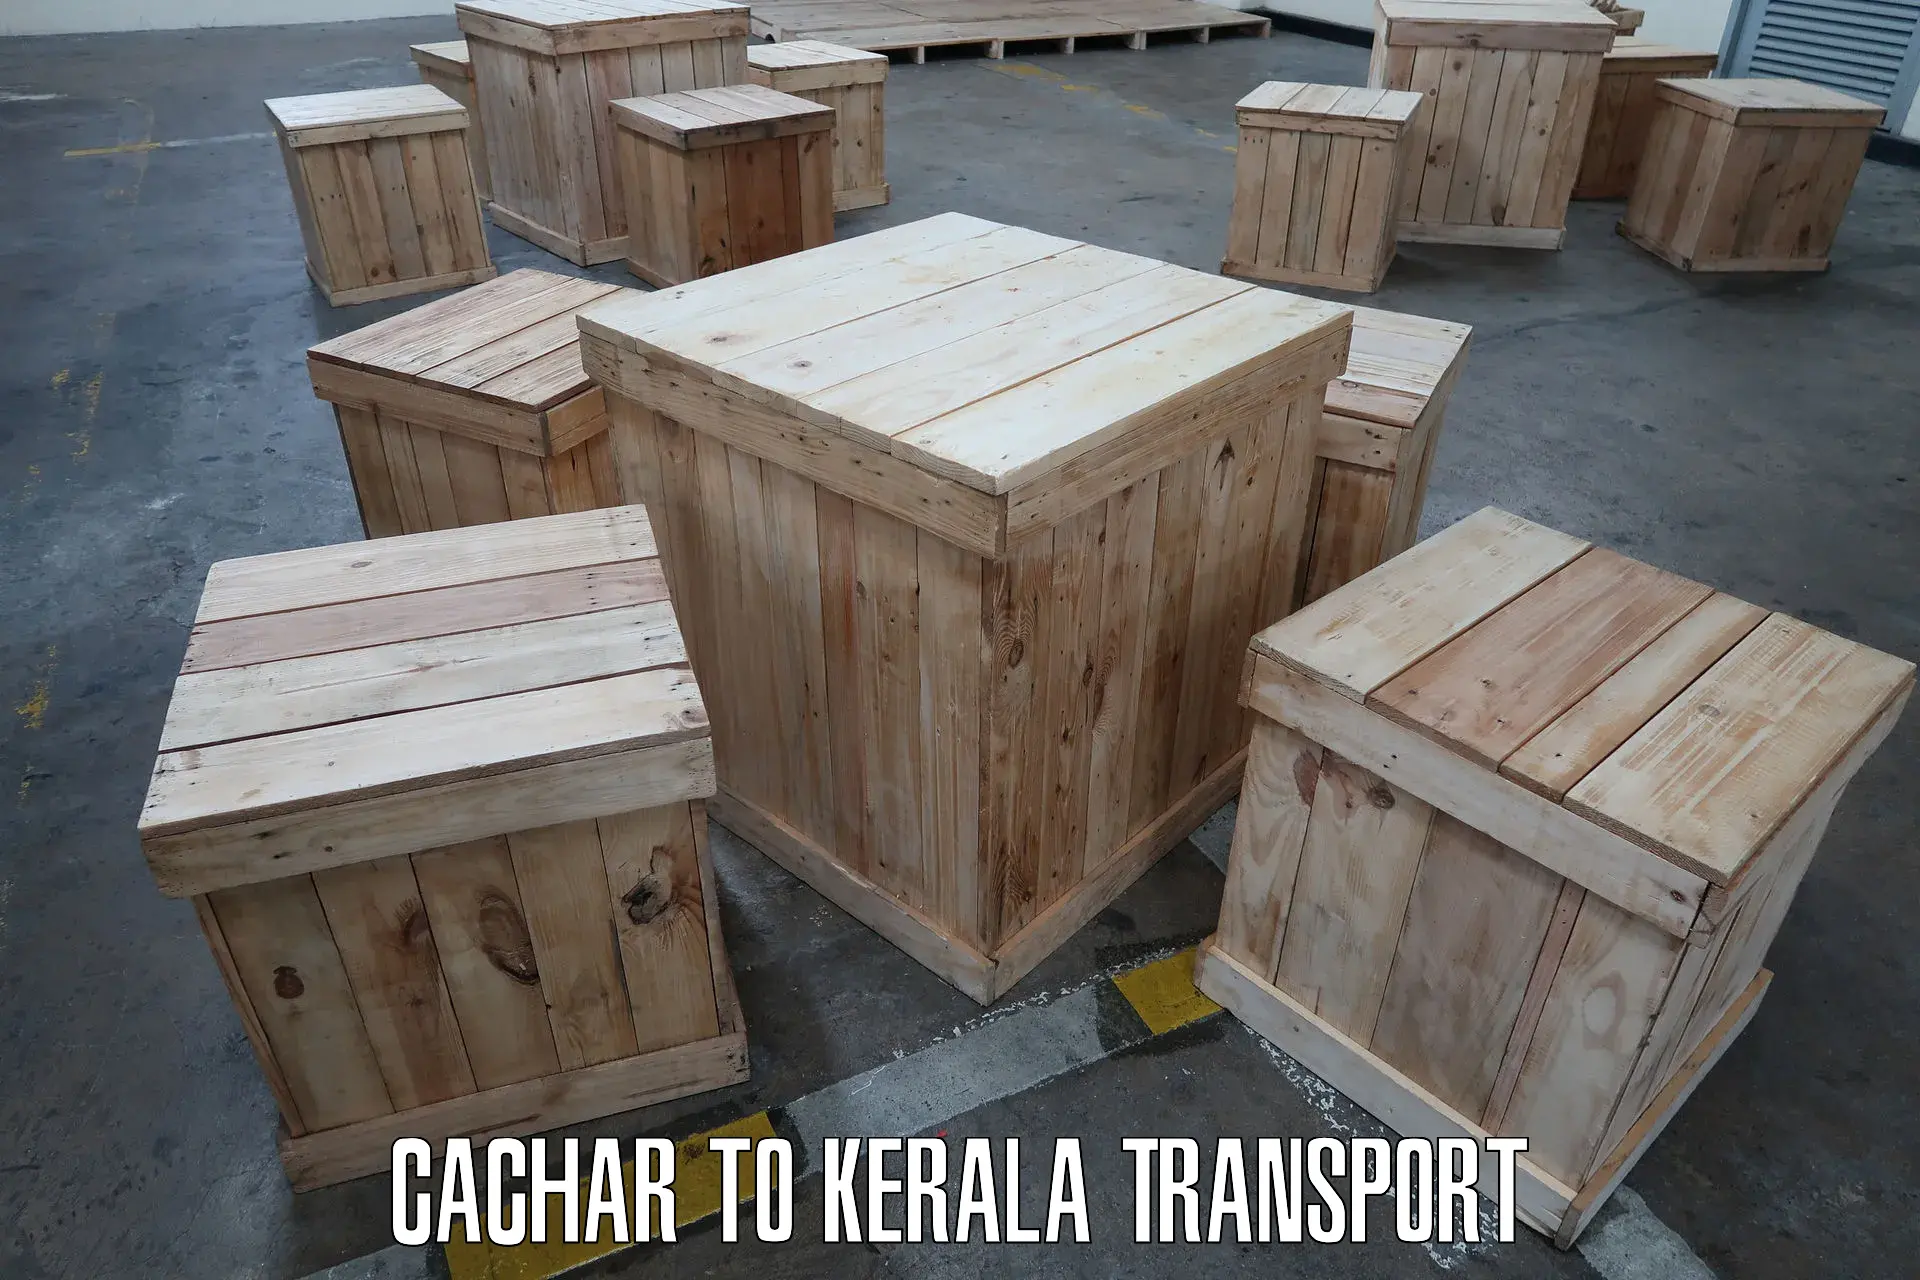 Transport shared services Cachar to Kottayam